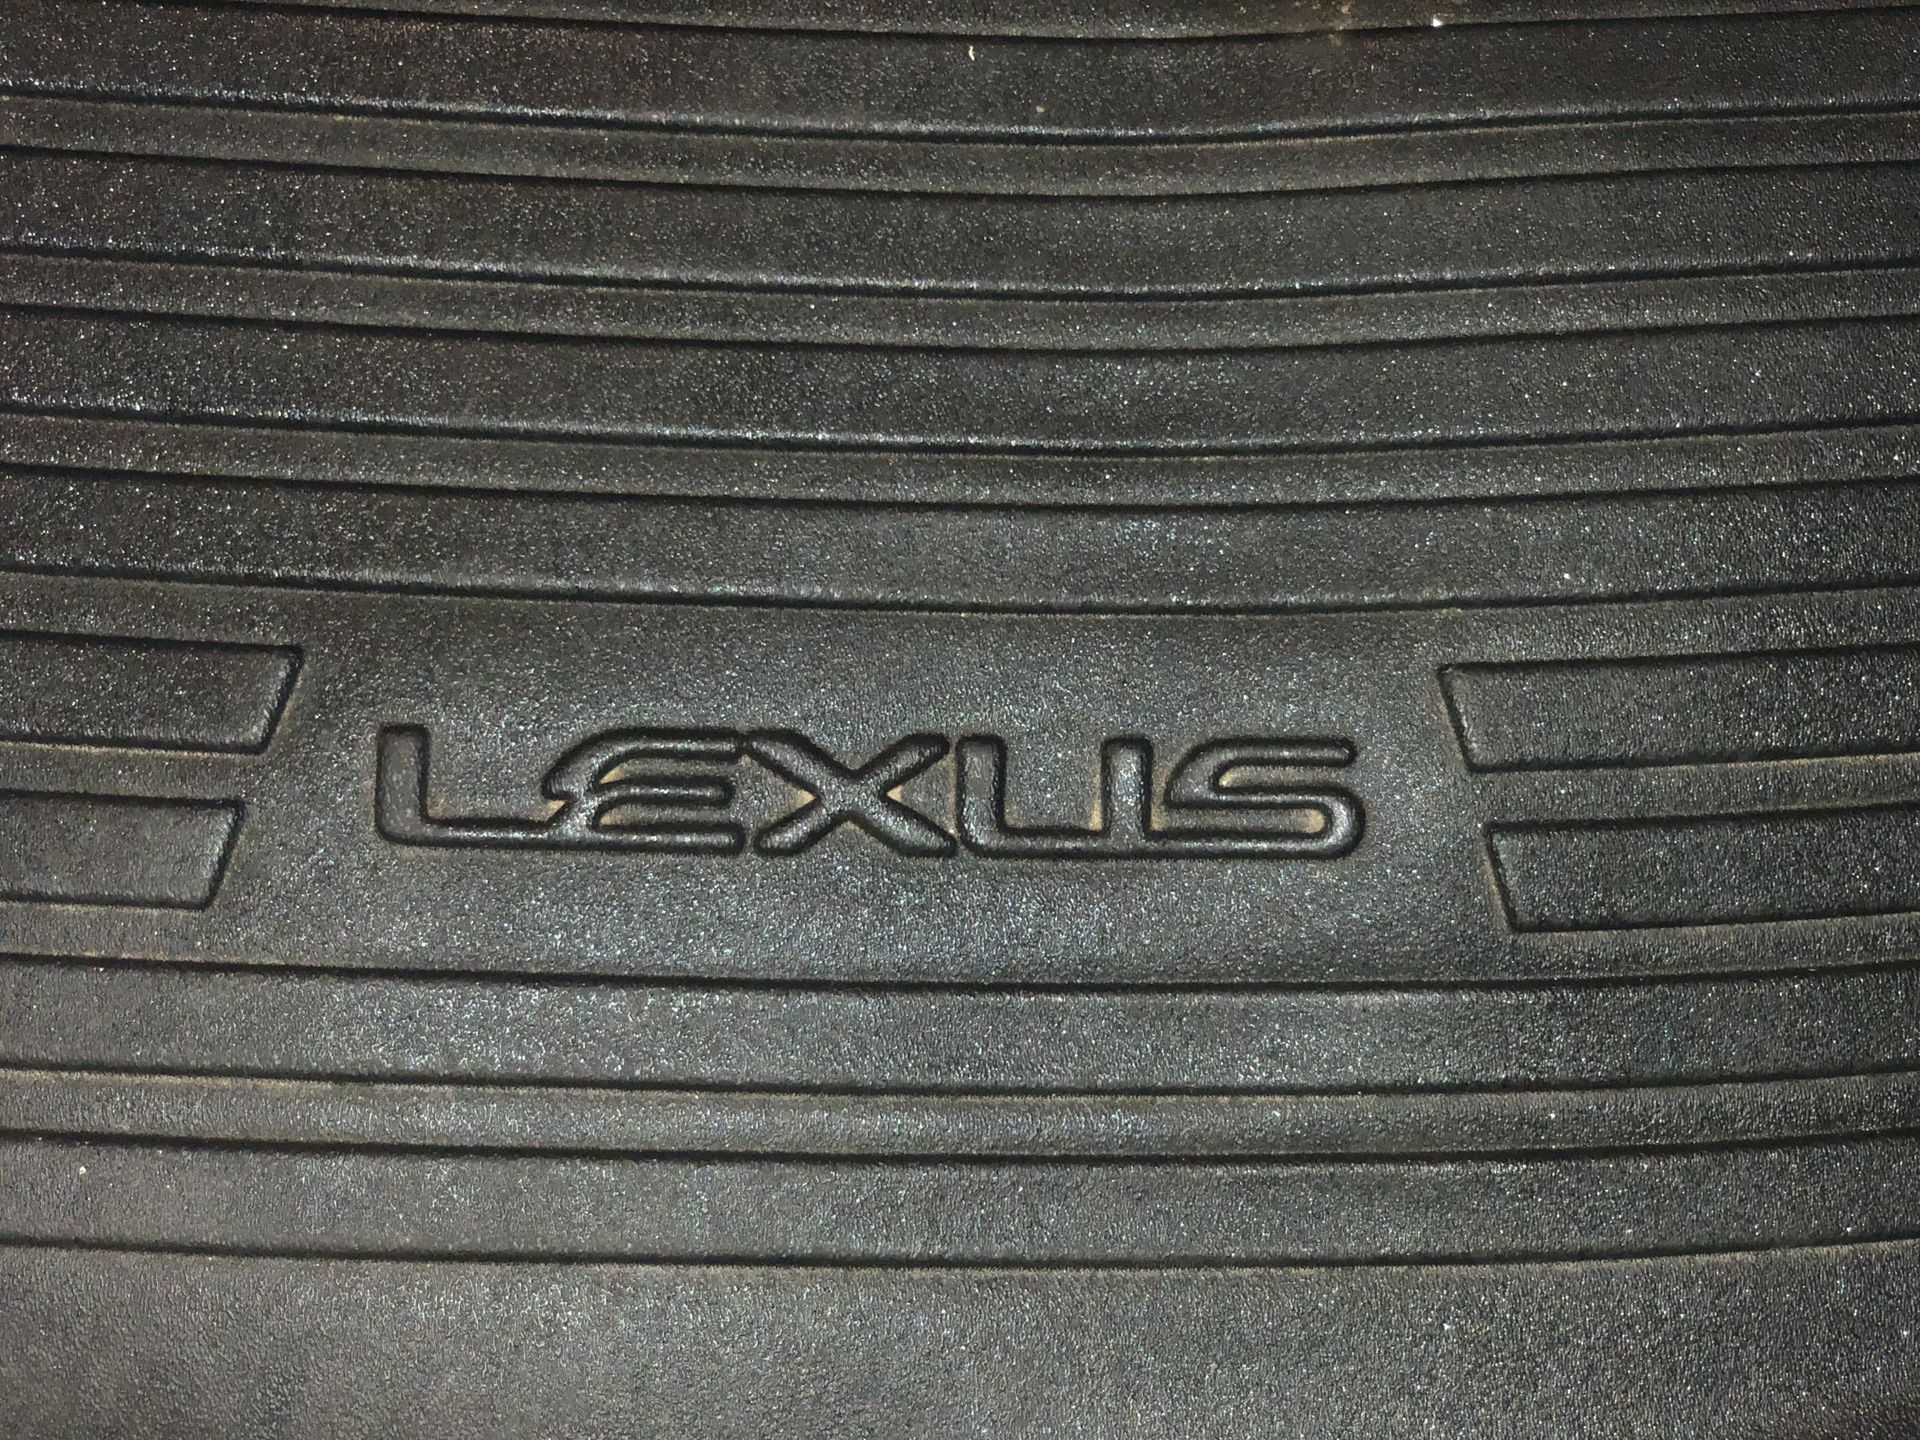 Lexus 2004-2006 cargo weather all covering mat